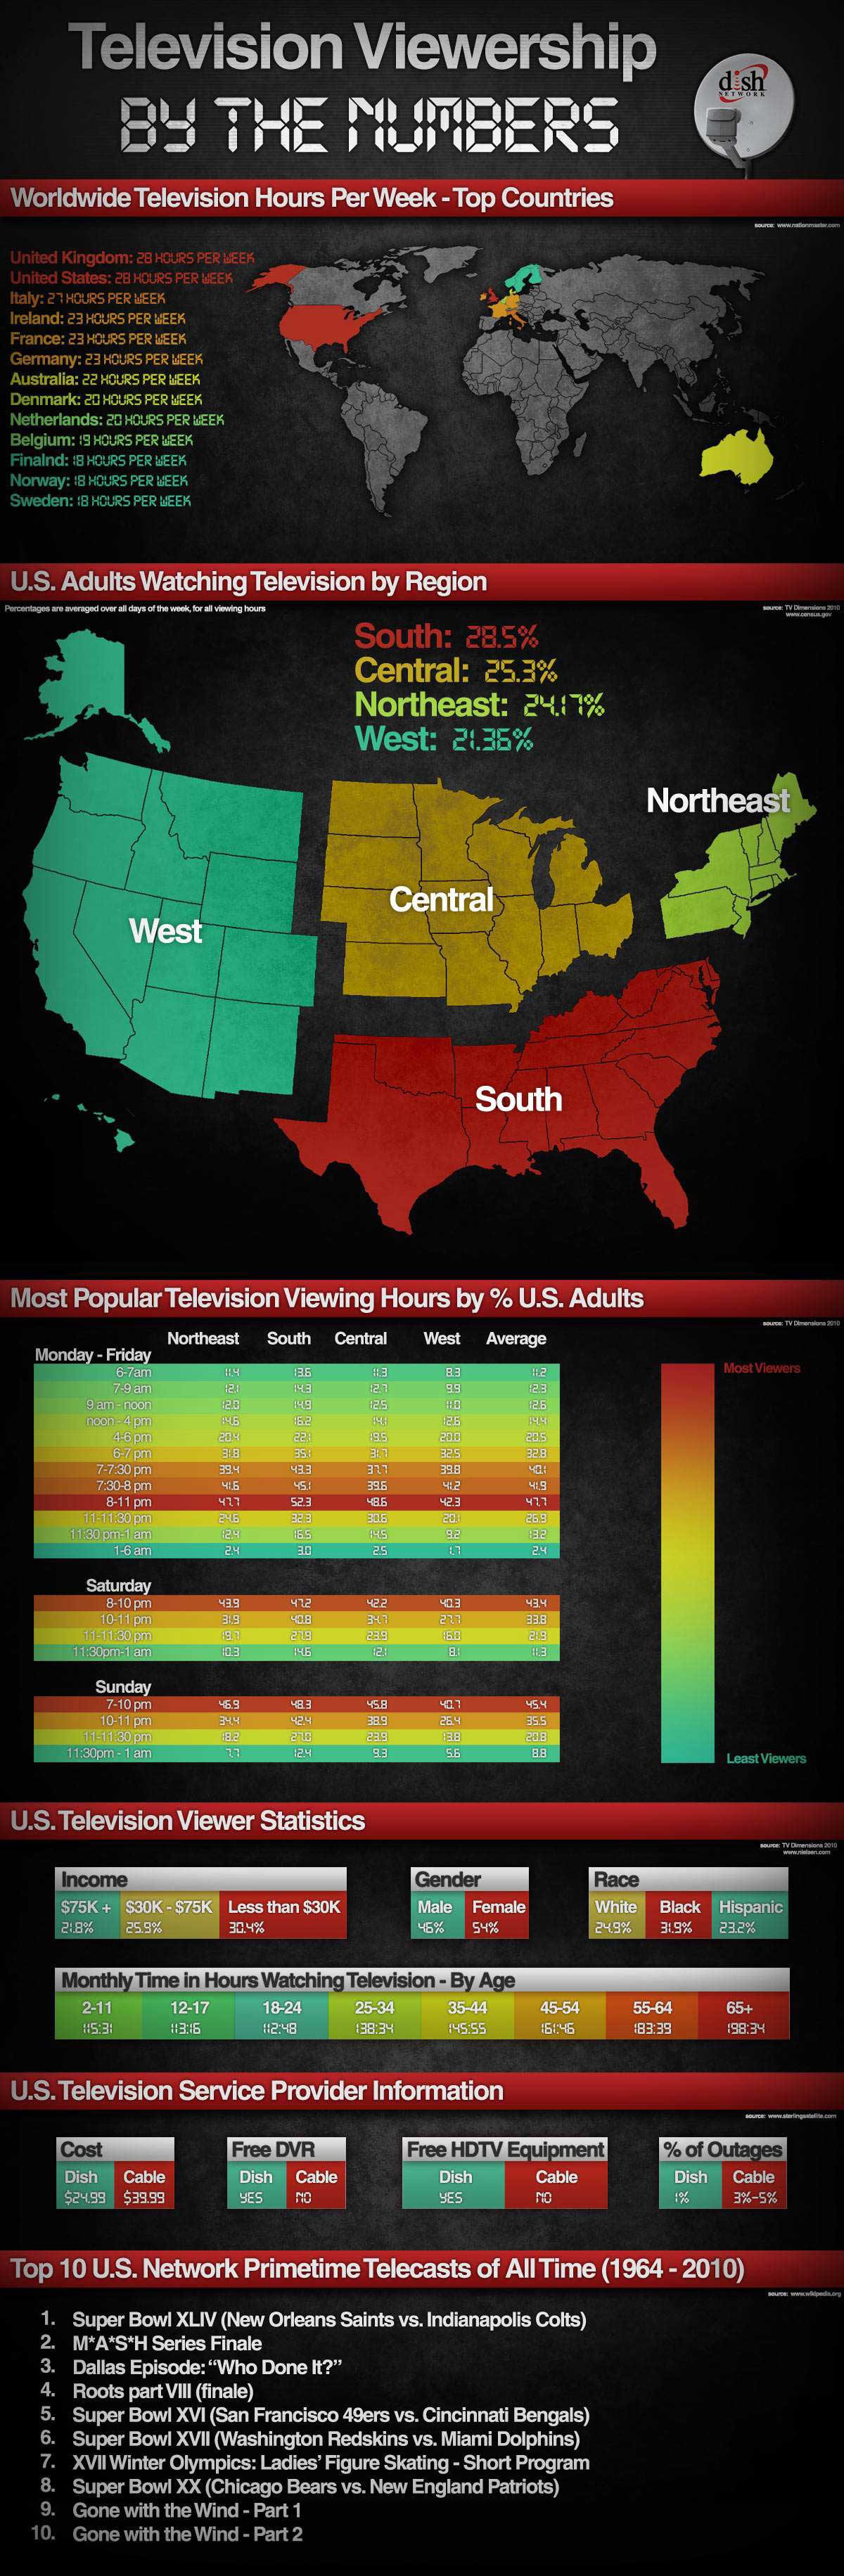 television-viewership-by-the-numbers_507db5c901832